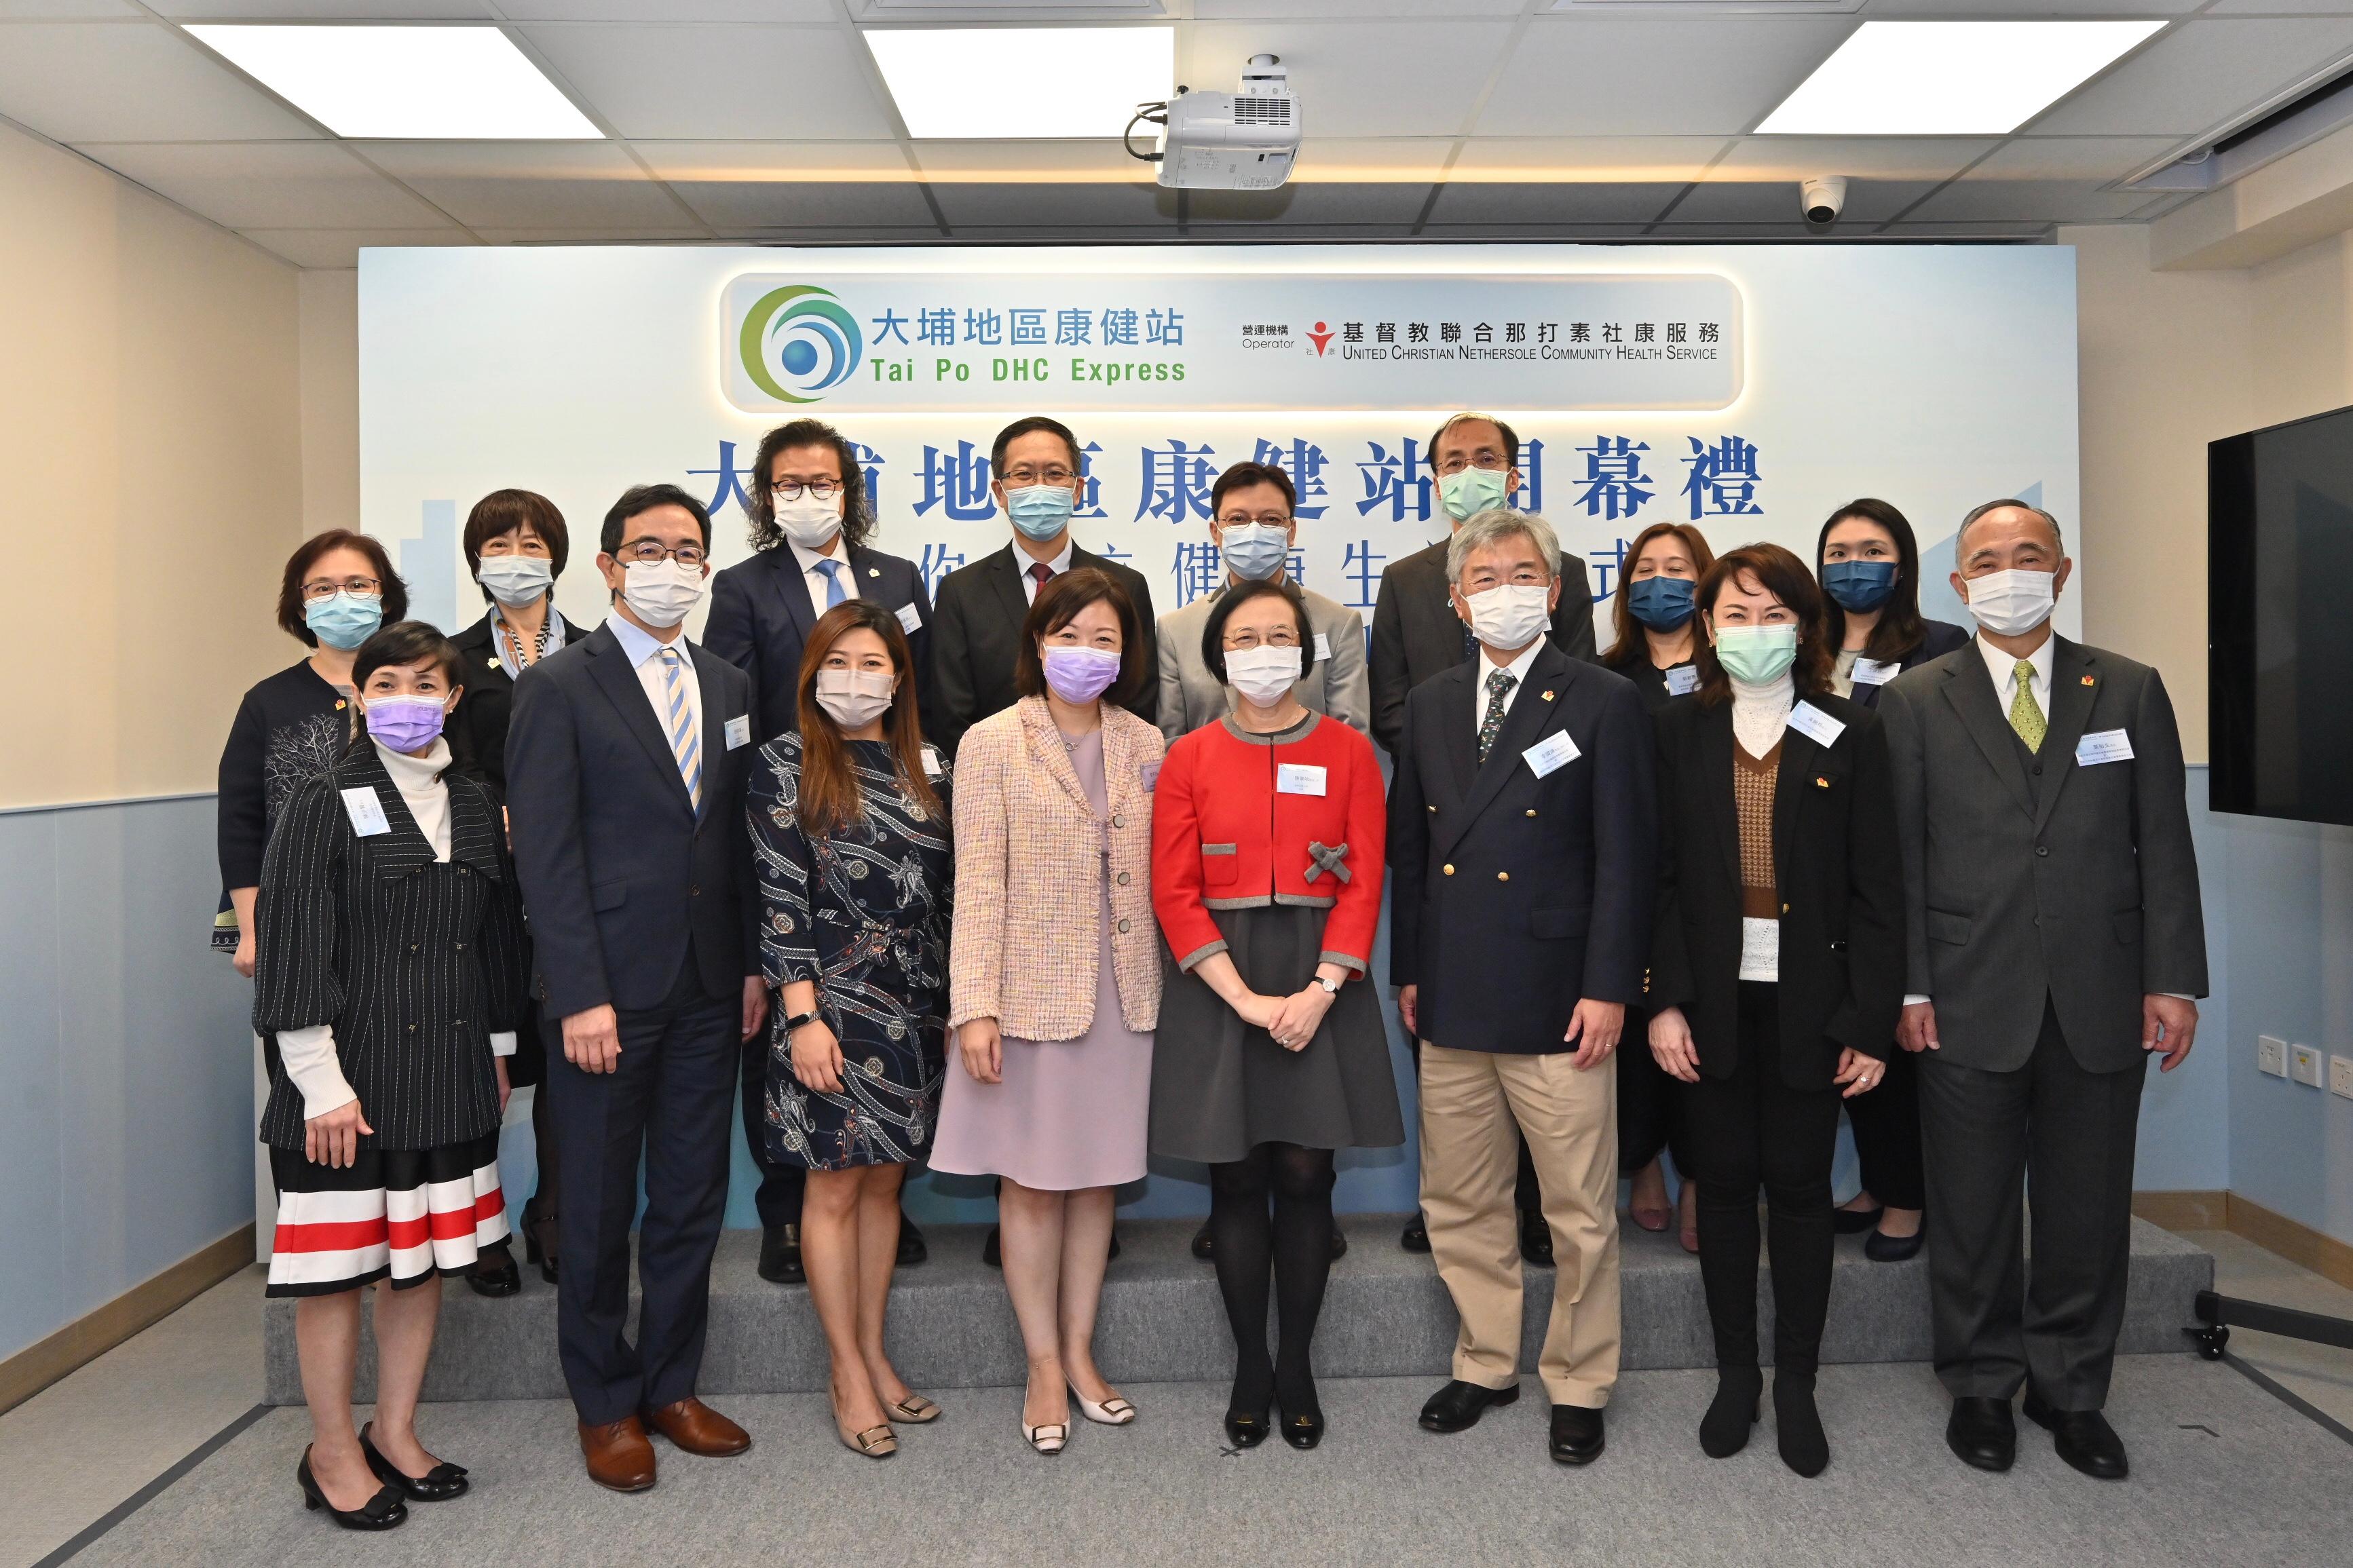 The Secretary for Food and Health, Professor Sophia Chan (front row, fourth right), is pictured with the Head of the Primary Healthcare Office, Dr Cissy Choi (front row, fourth left); the Chairperson of the United Christian Medical Service Board of Directors, Mr John Li (front row, third right); the Chairperson of the United Christian Nethersole Community Health Service Management Committee, Ms Grace Wong (front row, second right), and other participants at the opening ceremony of the Tai Po District Health Centre Express today (December 16).